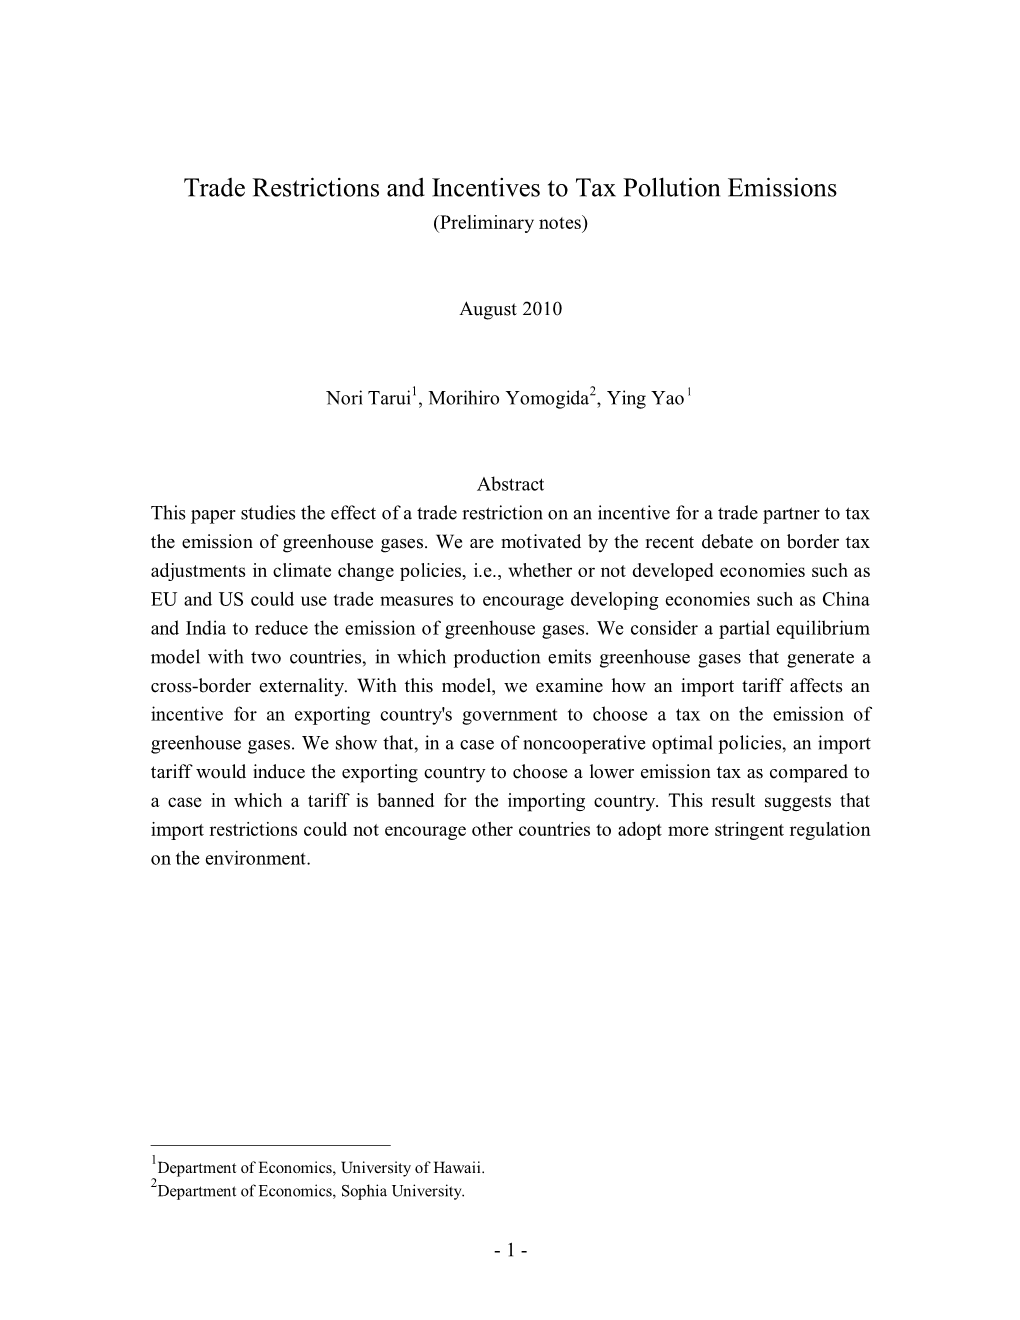 Trade Restrictions and Incentives to Tax Pollution Emissions (Preliminary Notes)